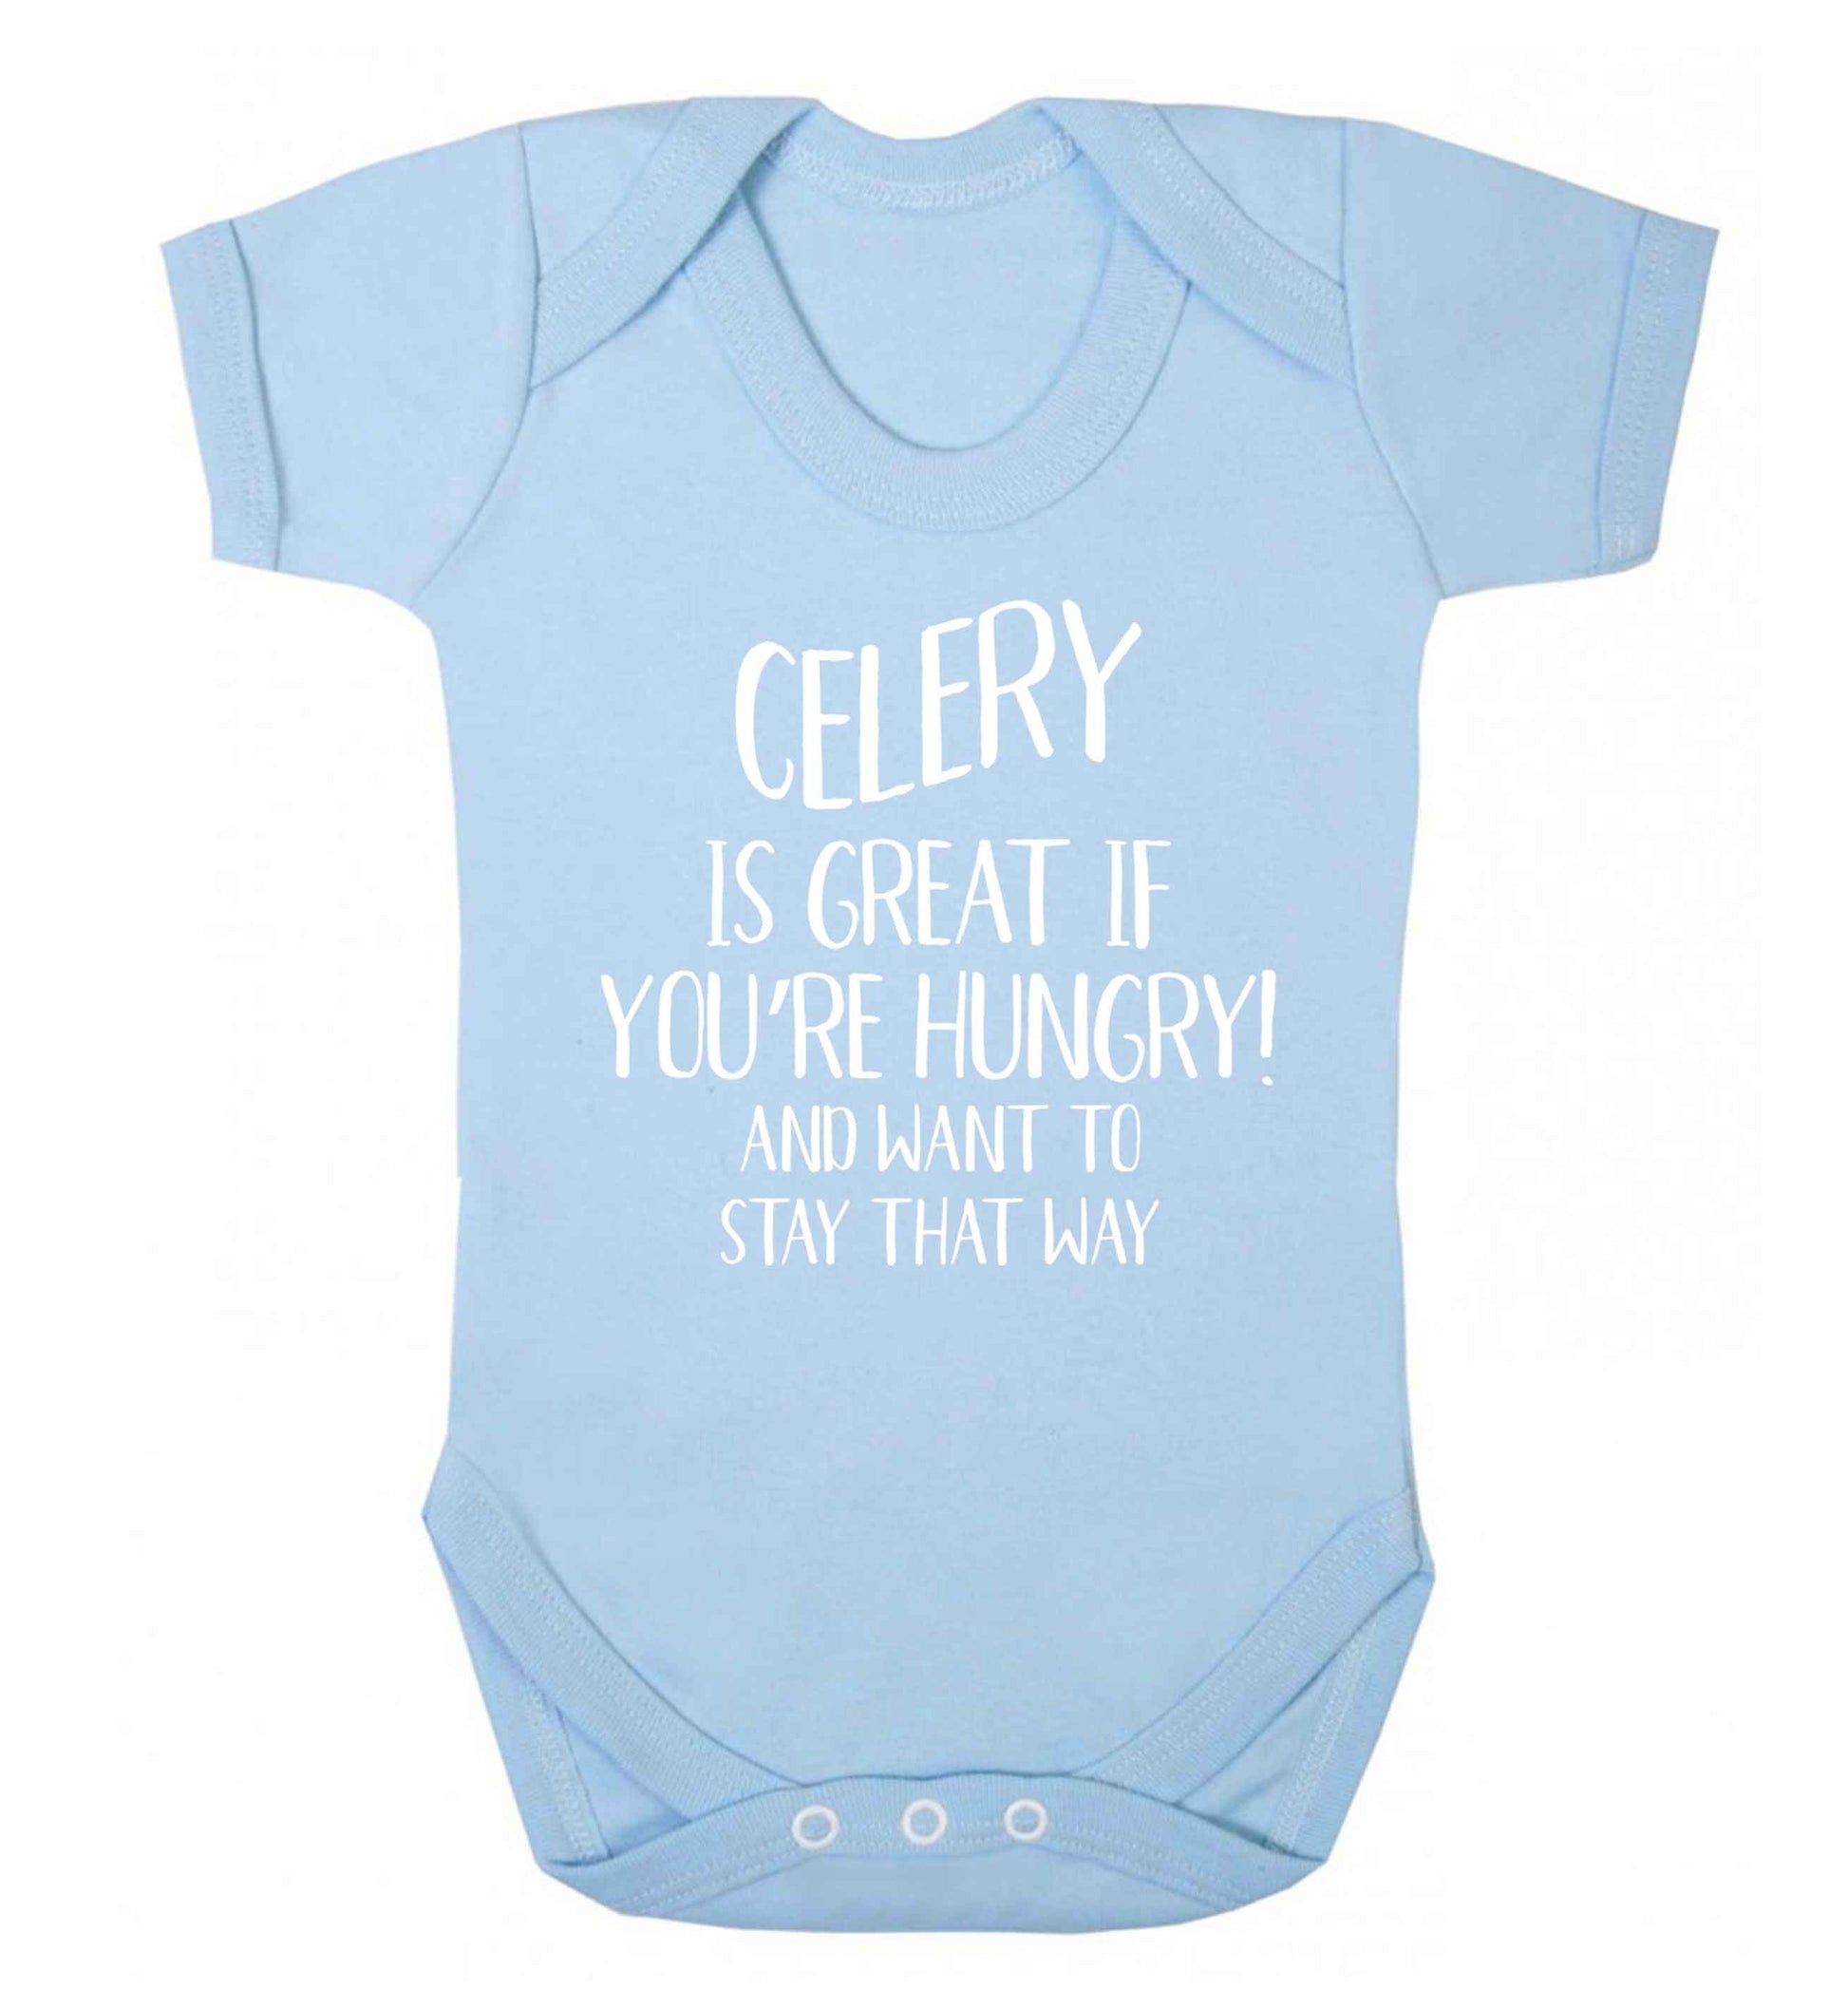 Cellery is great when you're hungry and want to stay that way Baby Vest pale blue 18-24 months